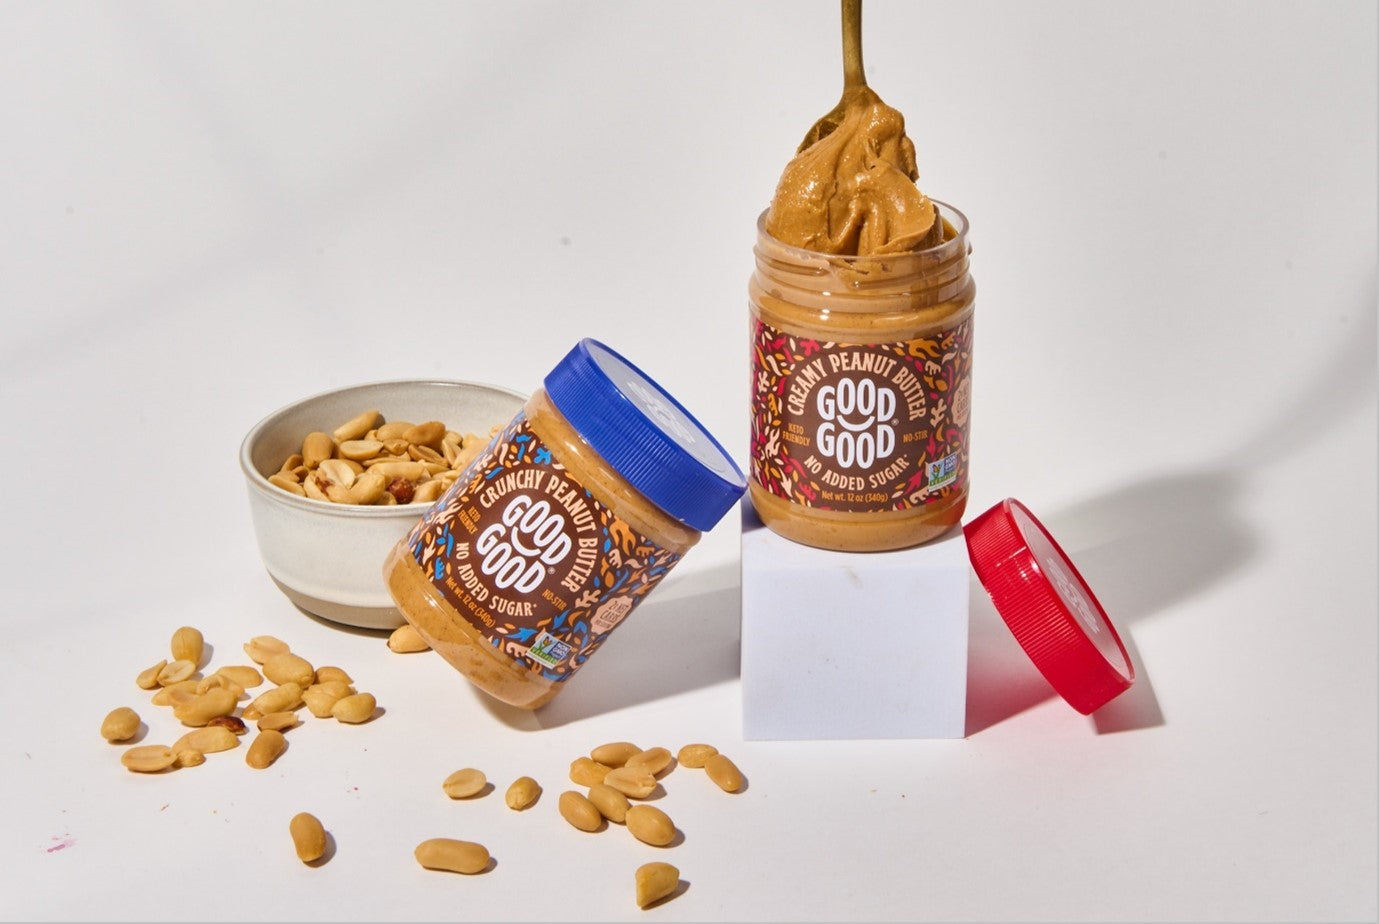 Fastest Growing Jam Brand In The USA Launches All-Natural Peanut Butter Exclusively at H-E-B